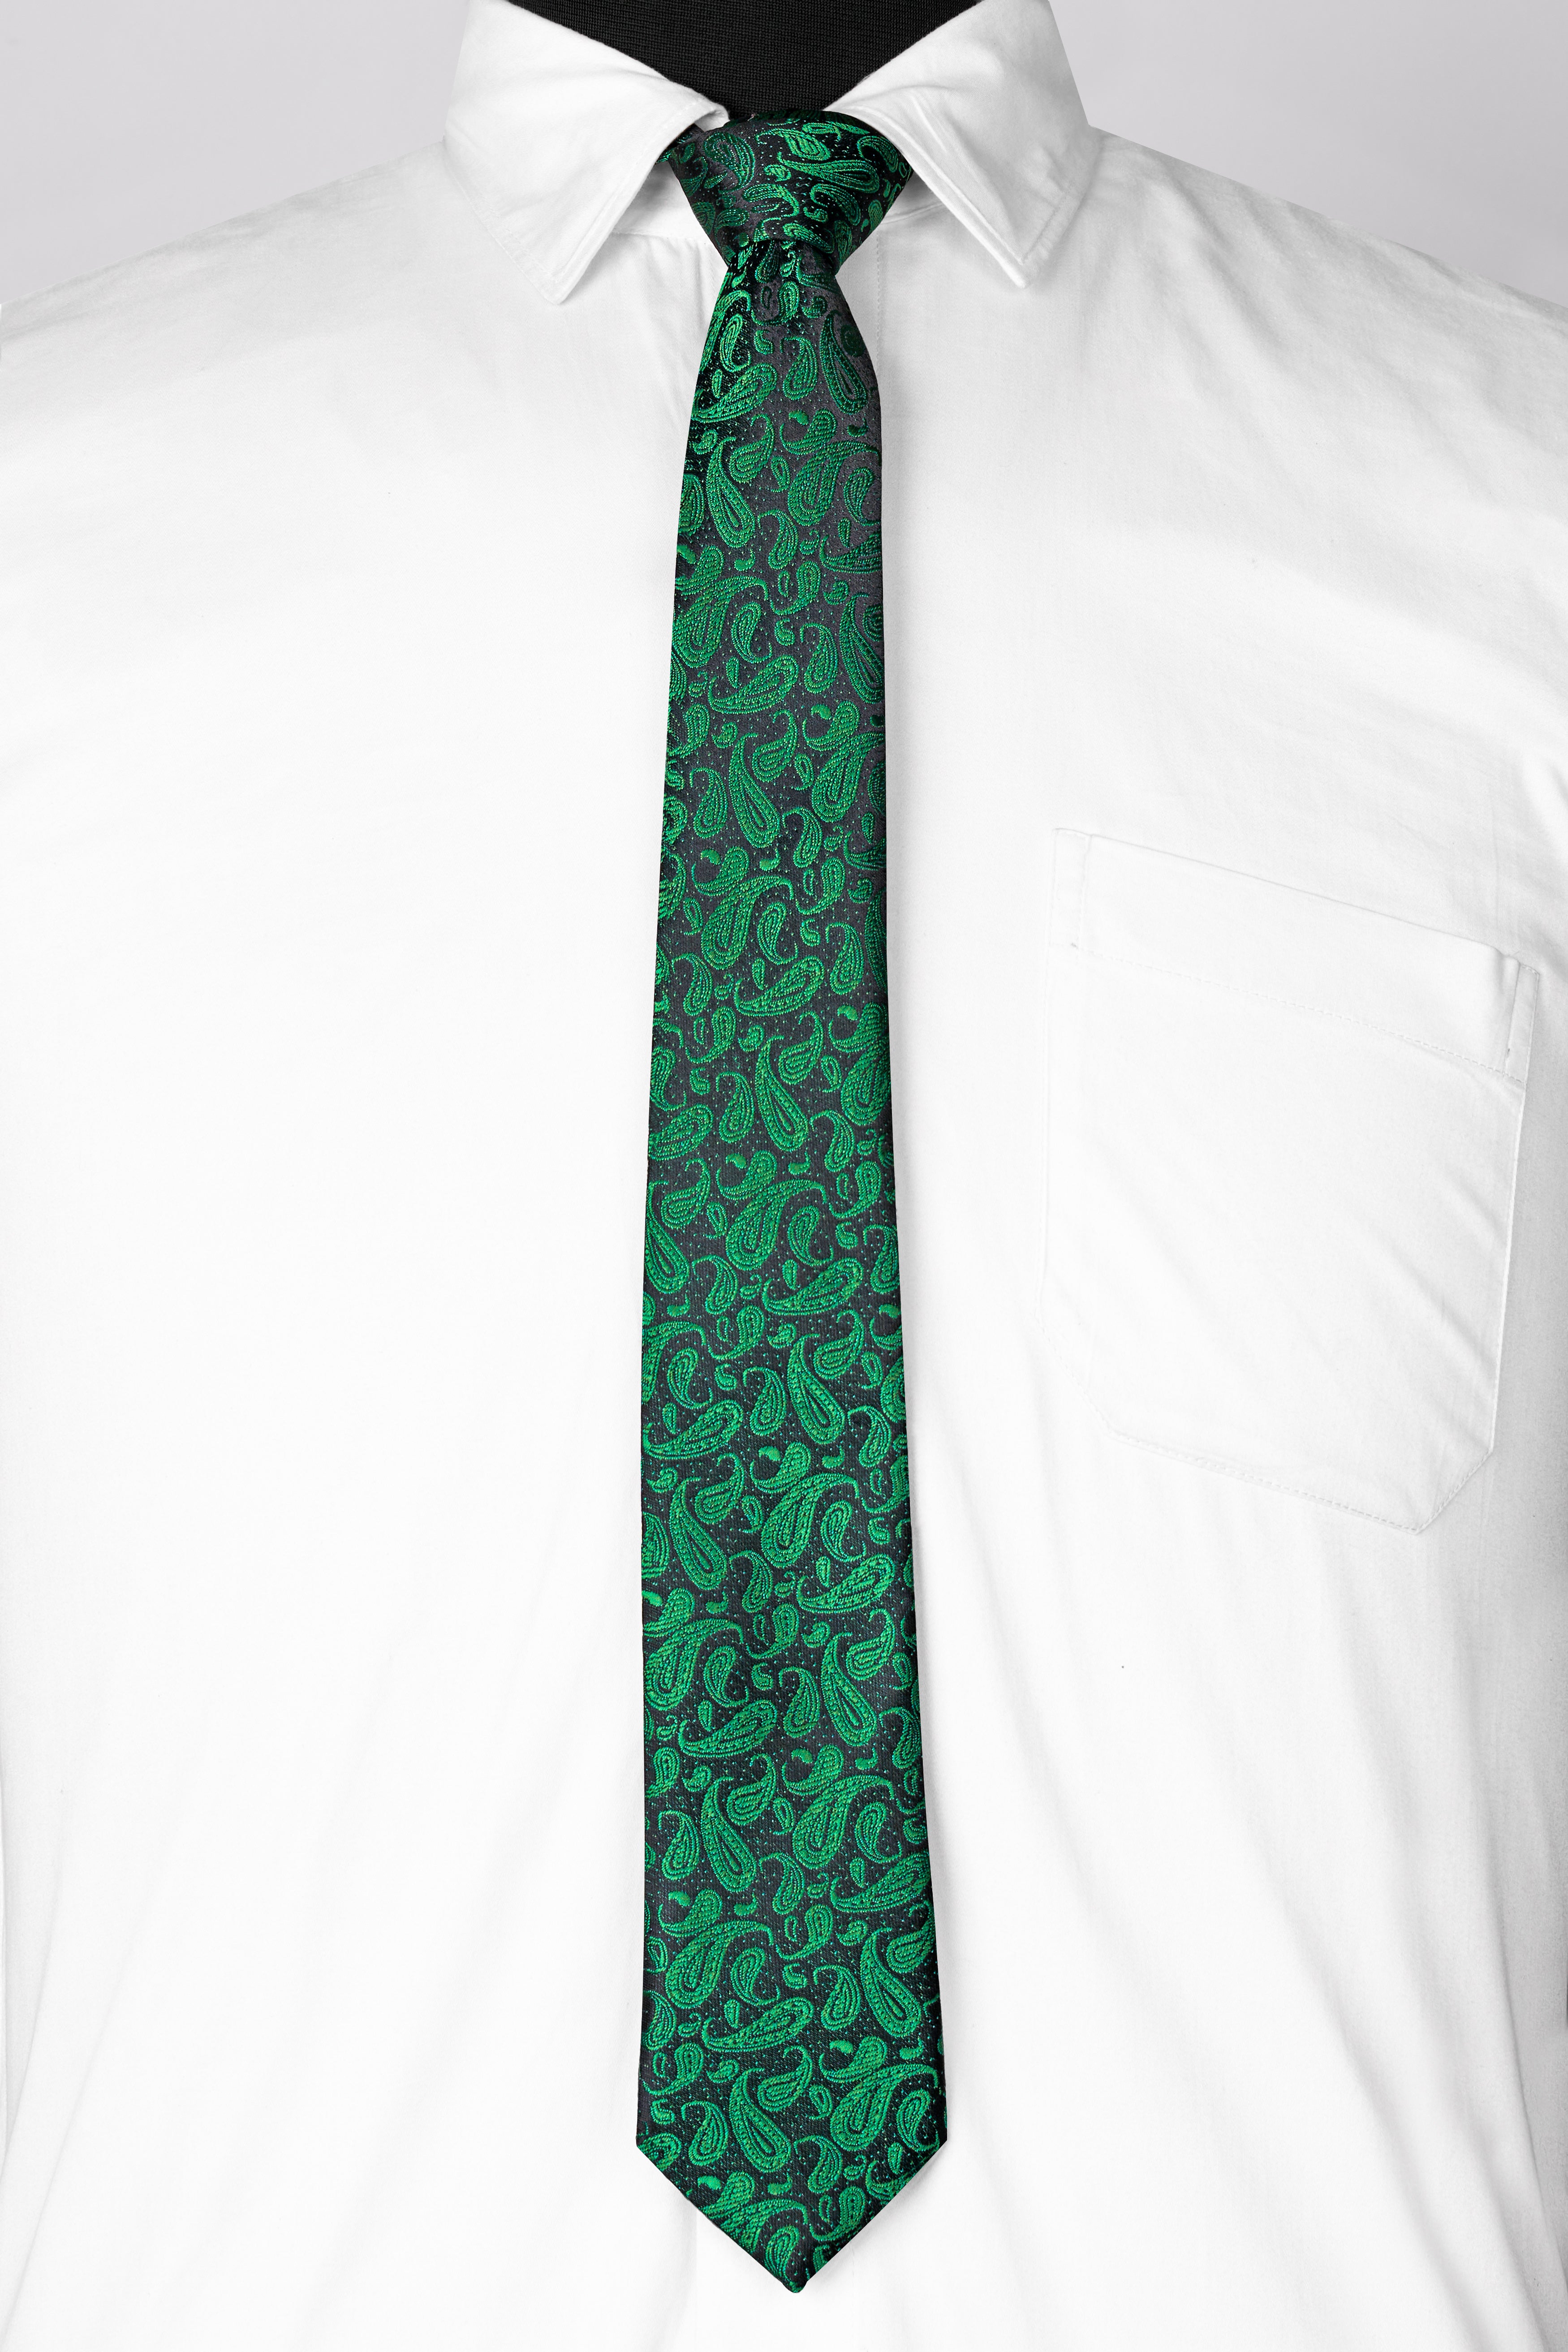 Jade Black with Meadow Green Paisley Jacquard Tie with Free Pocket Square TP048